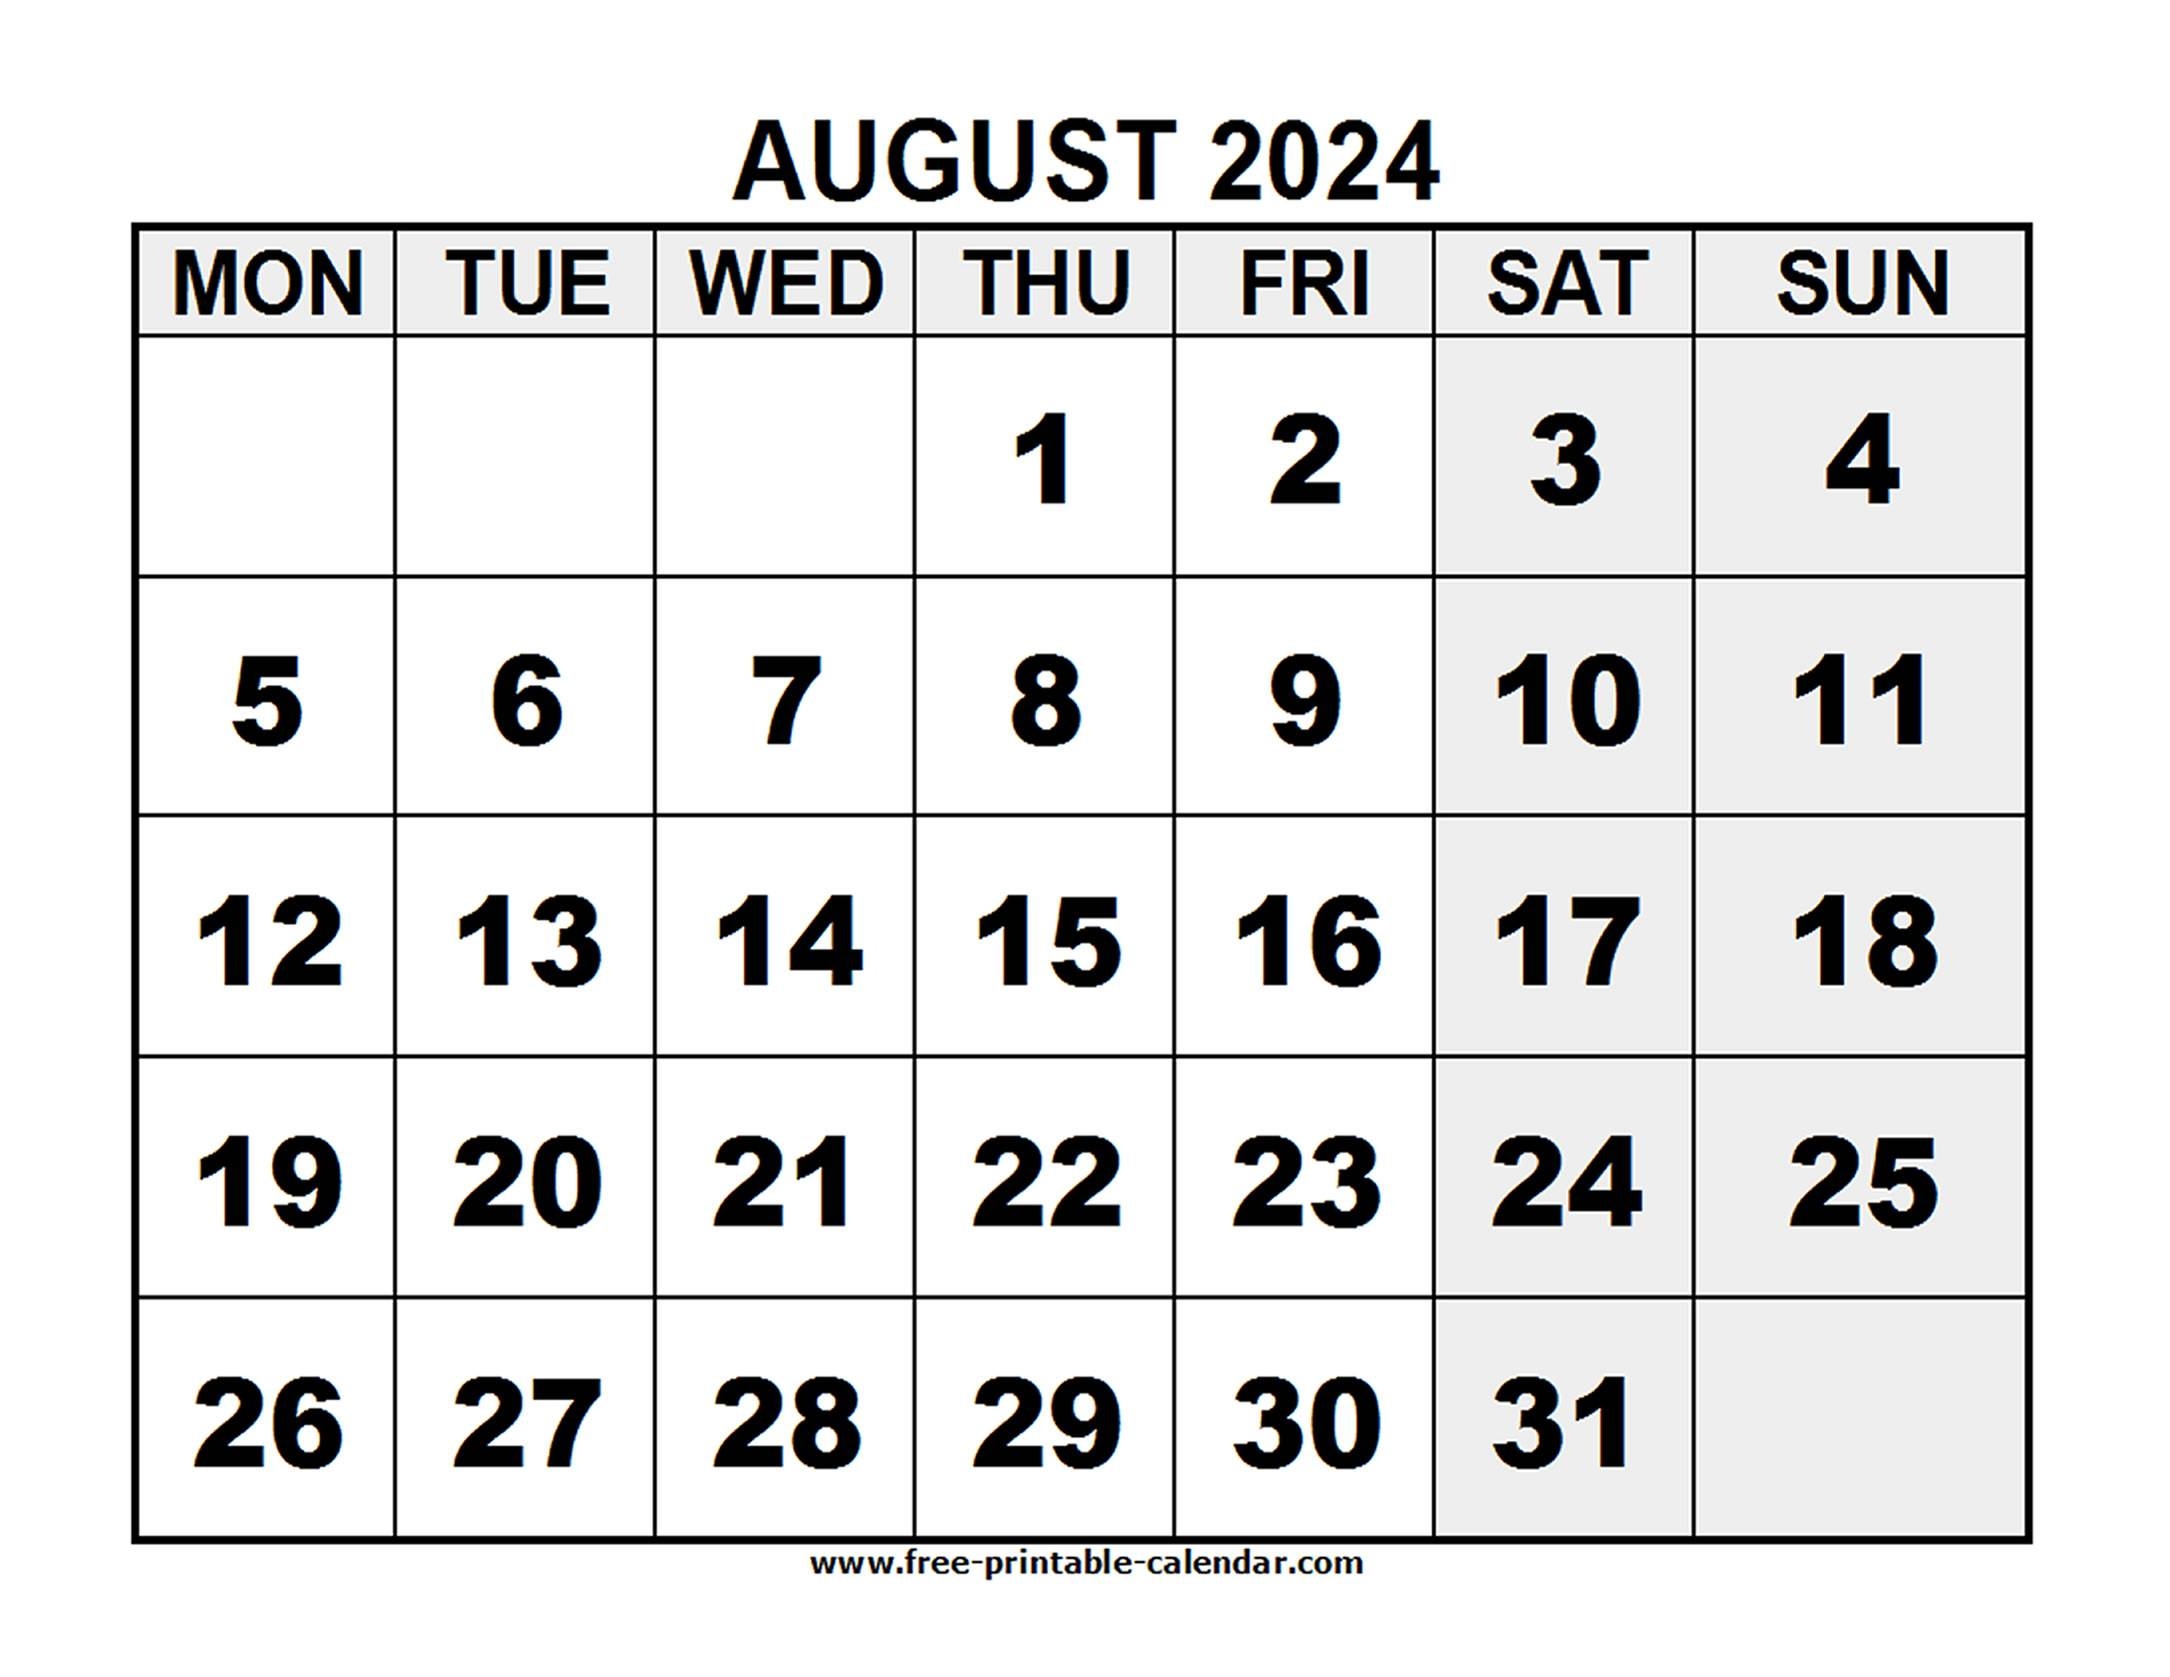 2024 August - Free-Printable-Calendar intended for Free Printable Calendar August 2024 To July 202